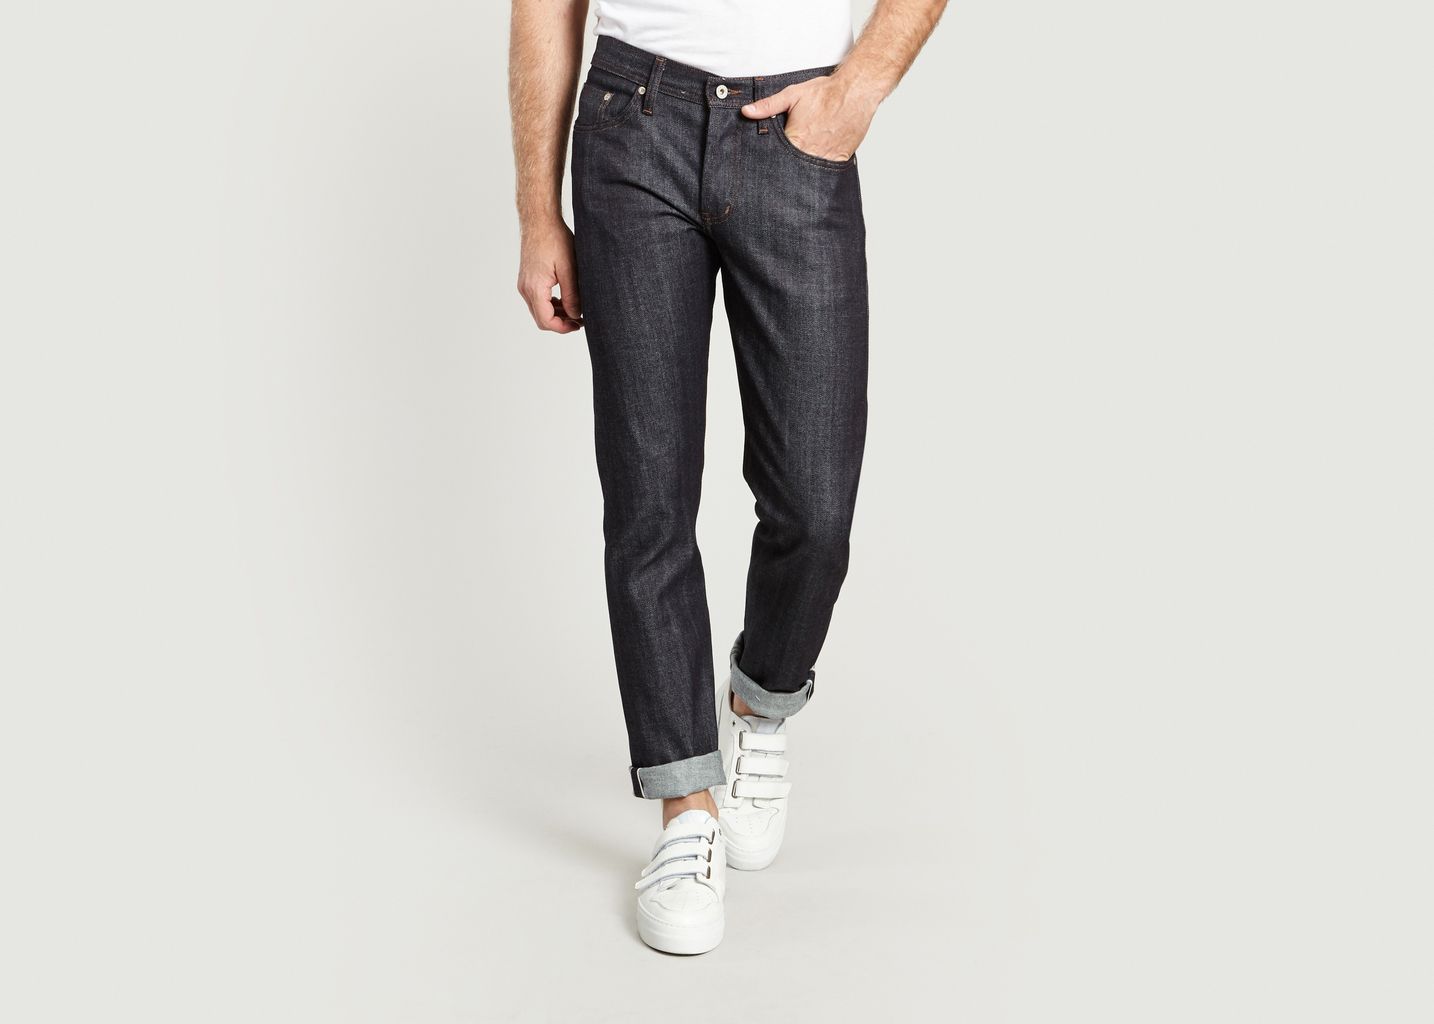 Jean Weird Guy – Stretch Selvedge - Naked and Famous